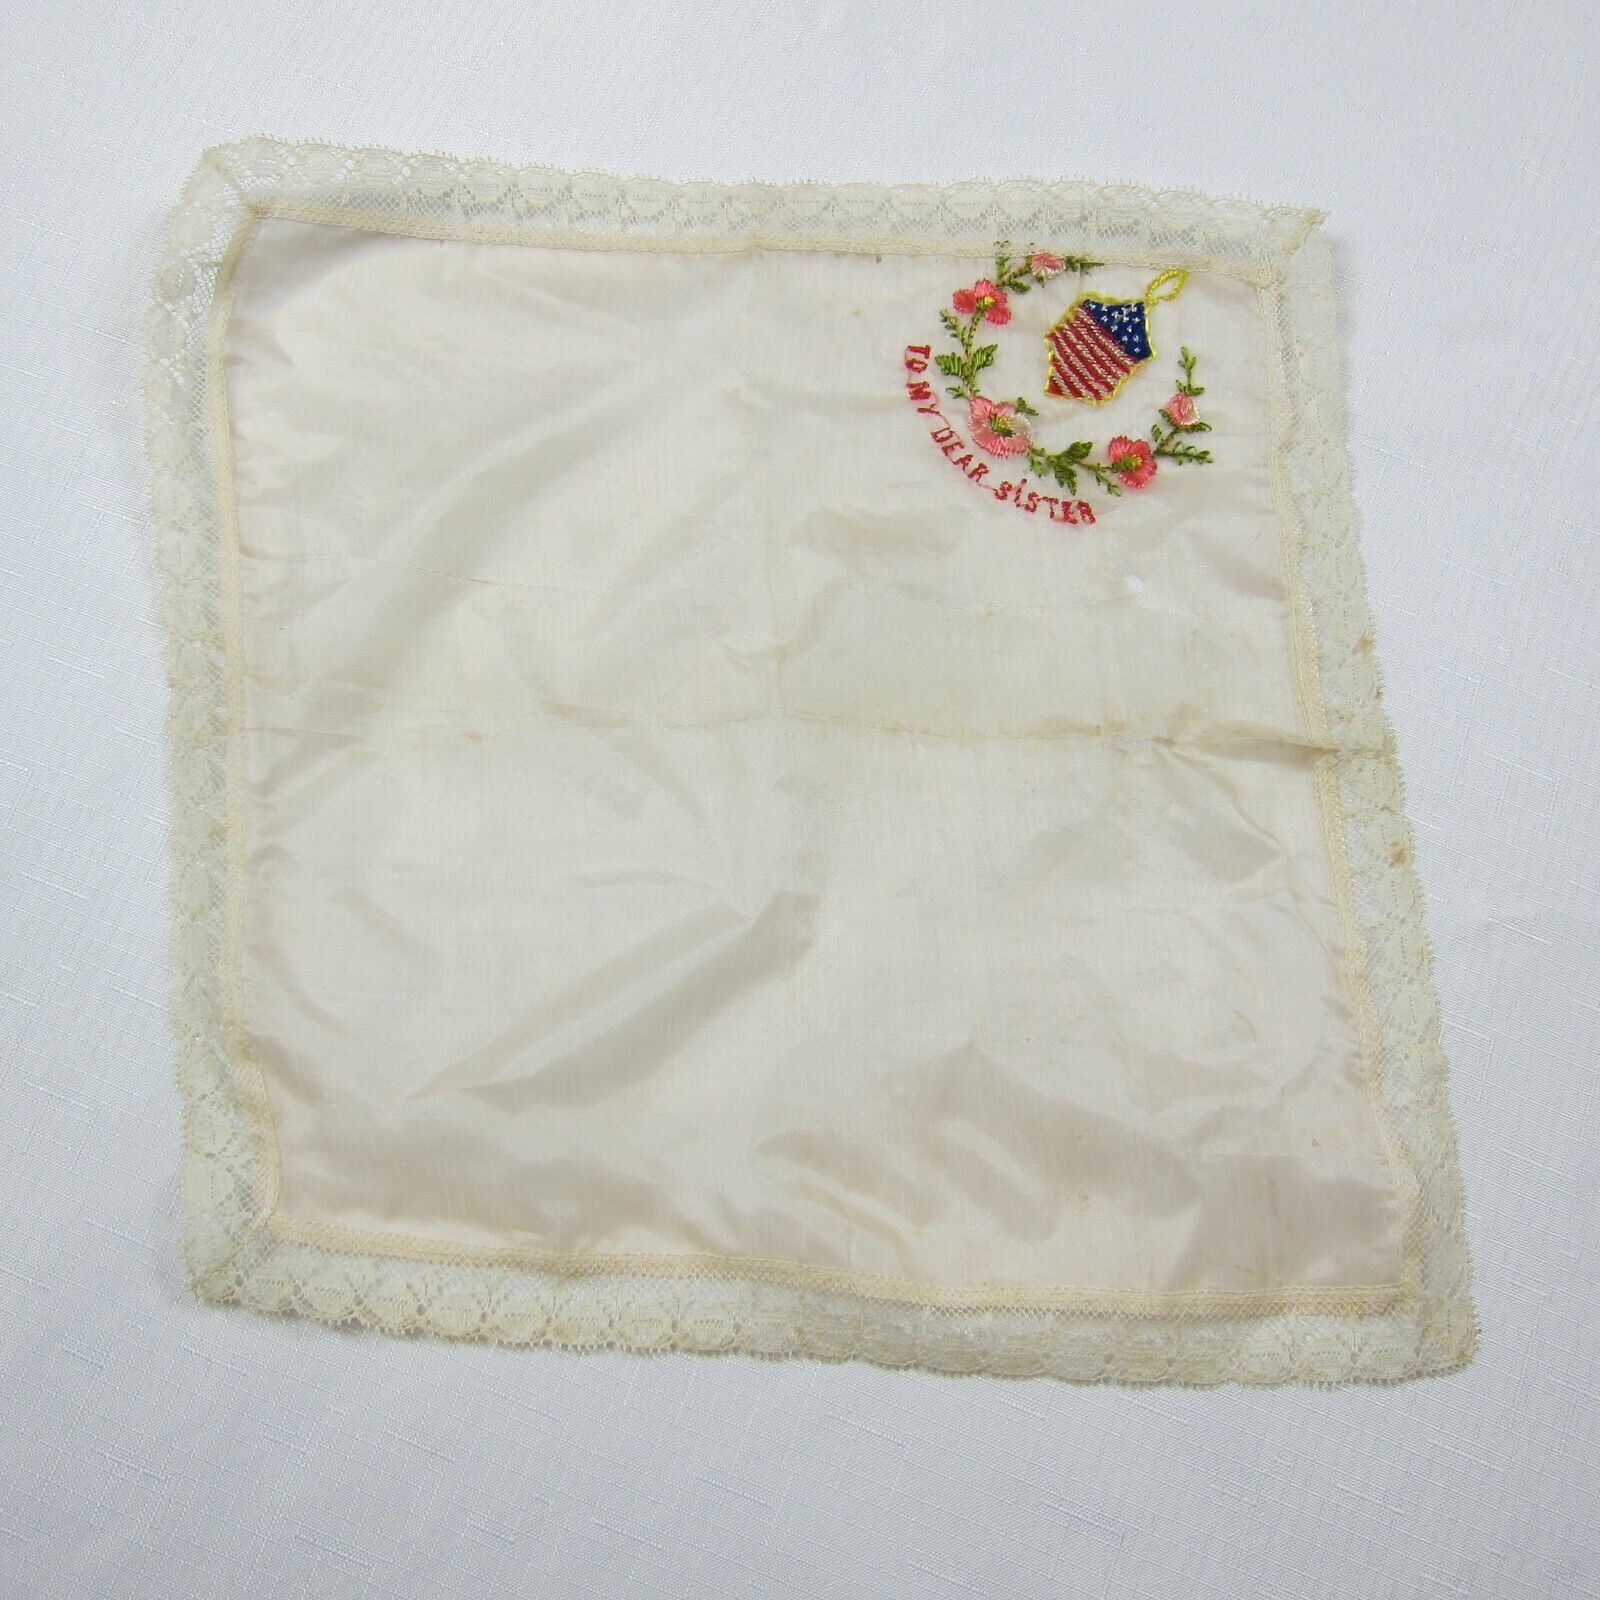 Vintage WWII Souvenir Silk Handkerchief USA Flag To My Dear Sister Floral & Lace